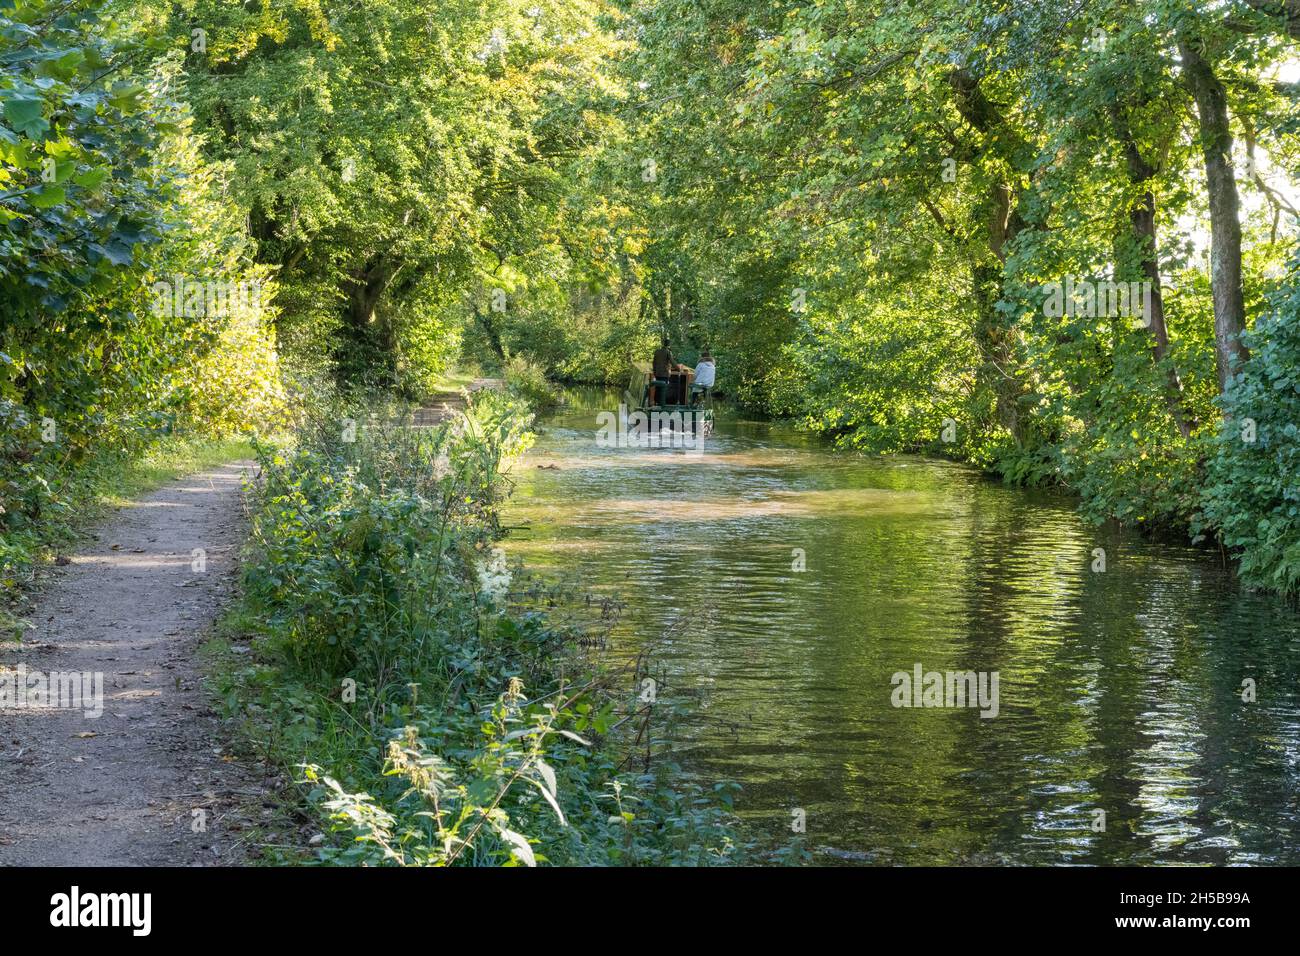 Summer's day at the Monmouthshire and Brecon Canal at LLanover, Monmouthshire, Wales UK Stock Photo